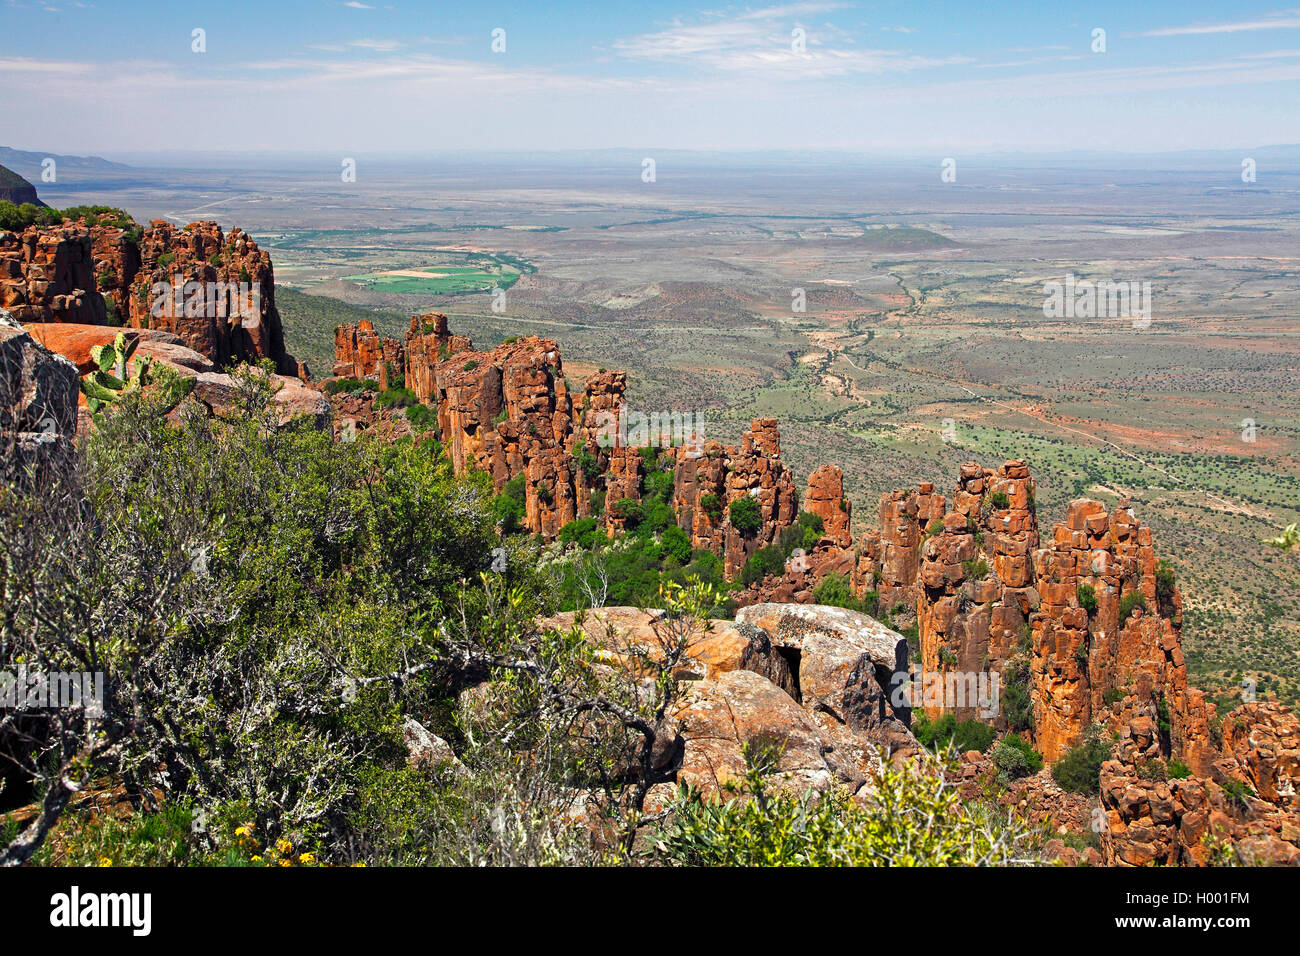 Valley of Desolation, South Africa, Eastern Cape, Camdeboo National Park, Graaff-Reinet Stock Photo